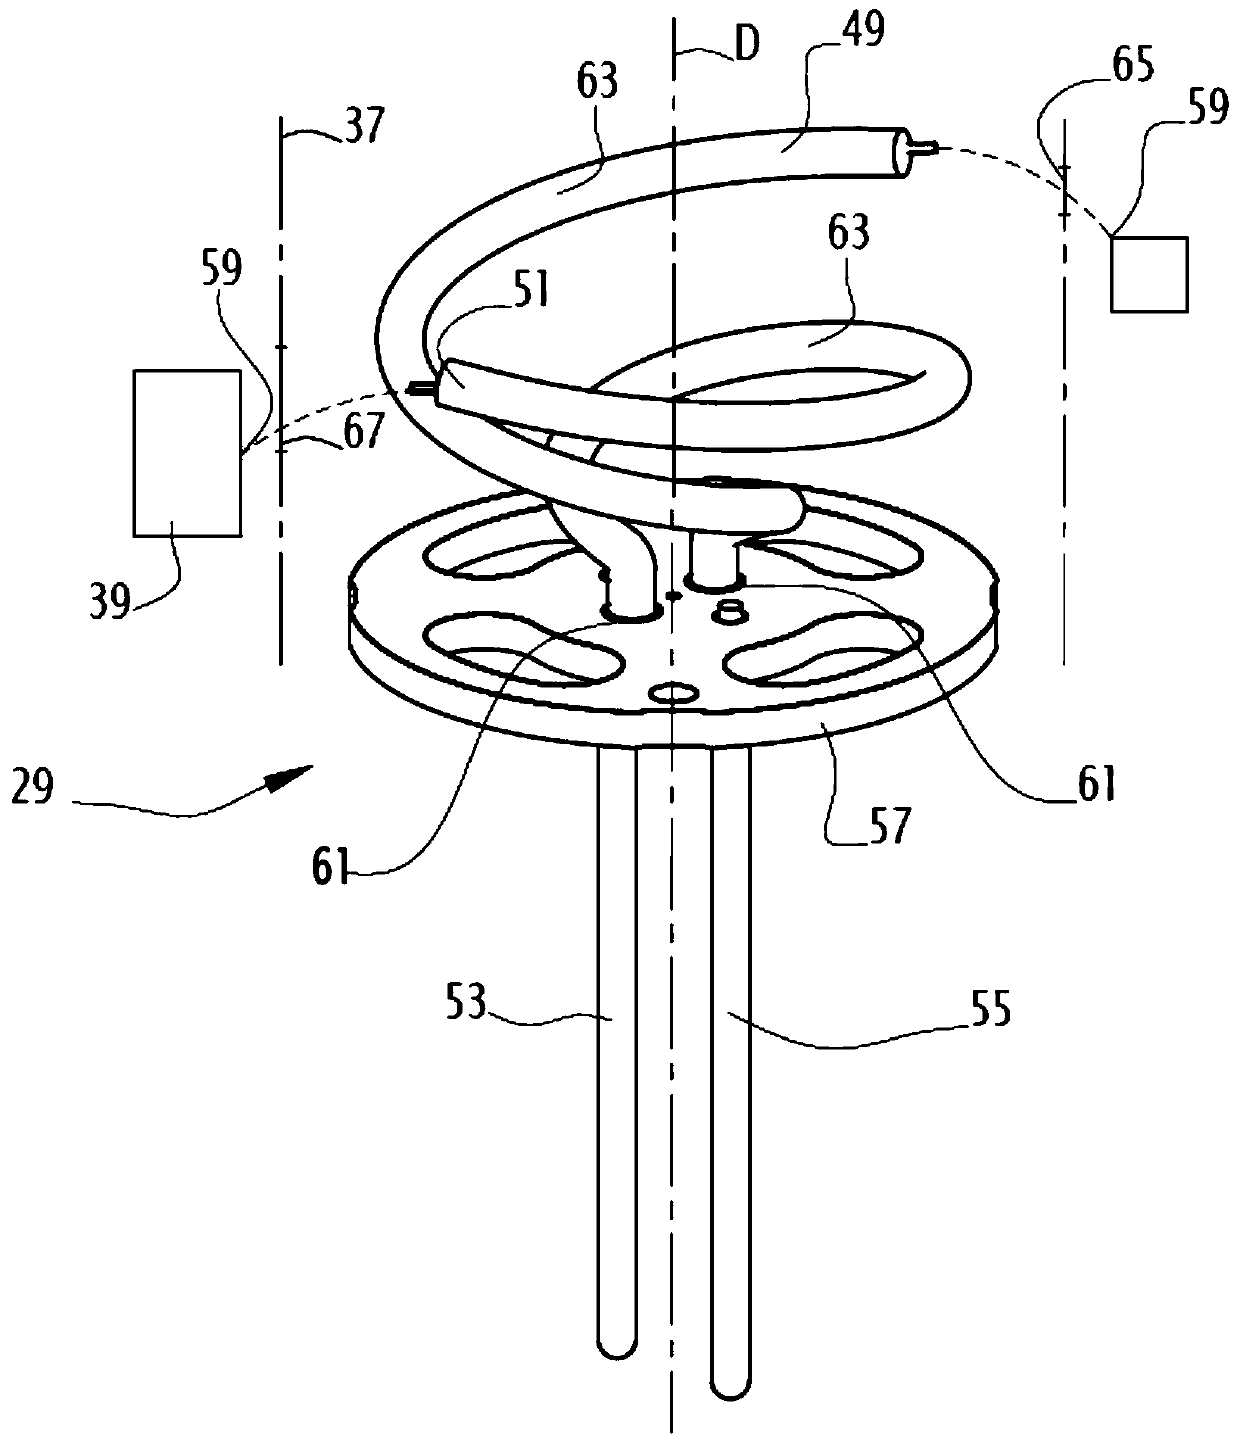 Electrodynamic loudspeaker including electrical power supply wires that are internal with respect to the coil holder